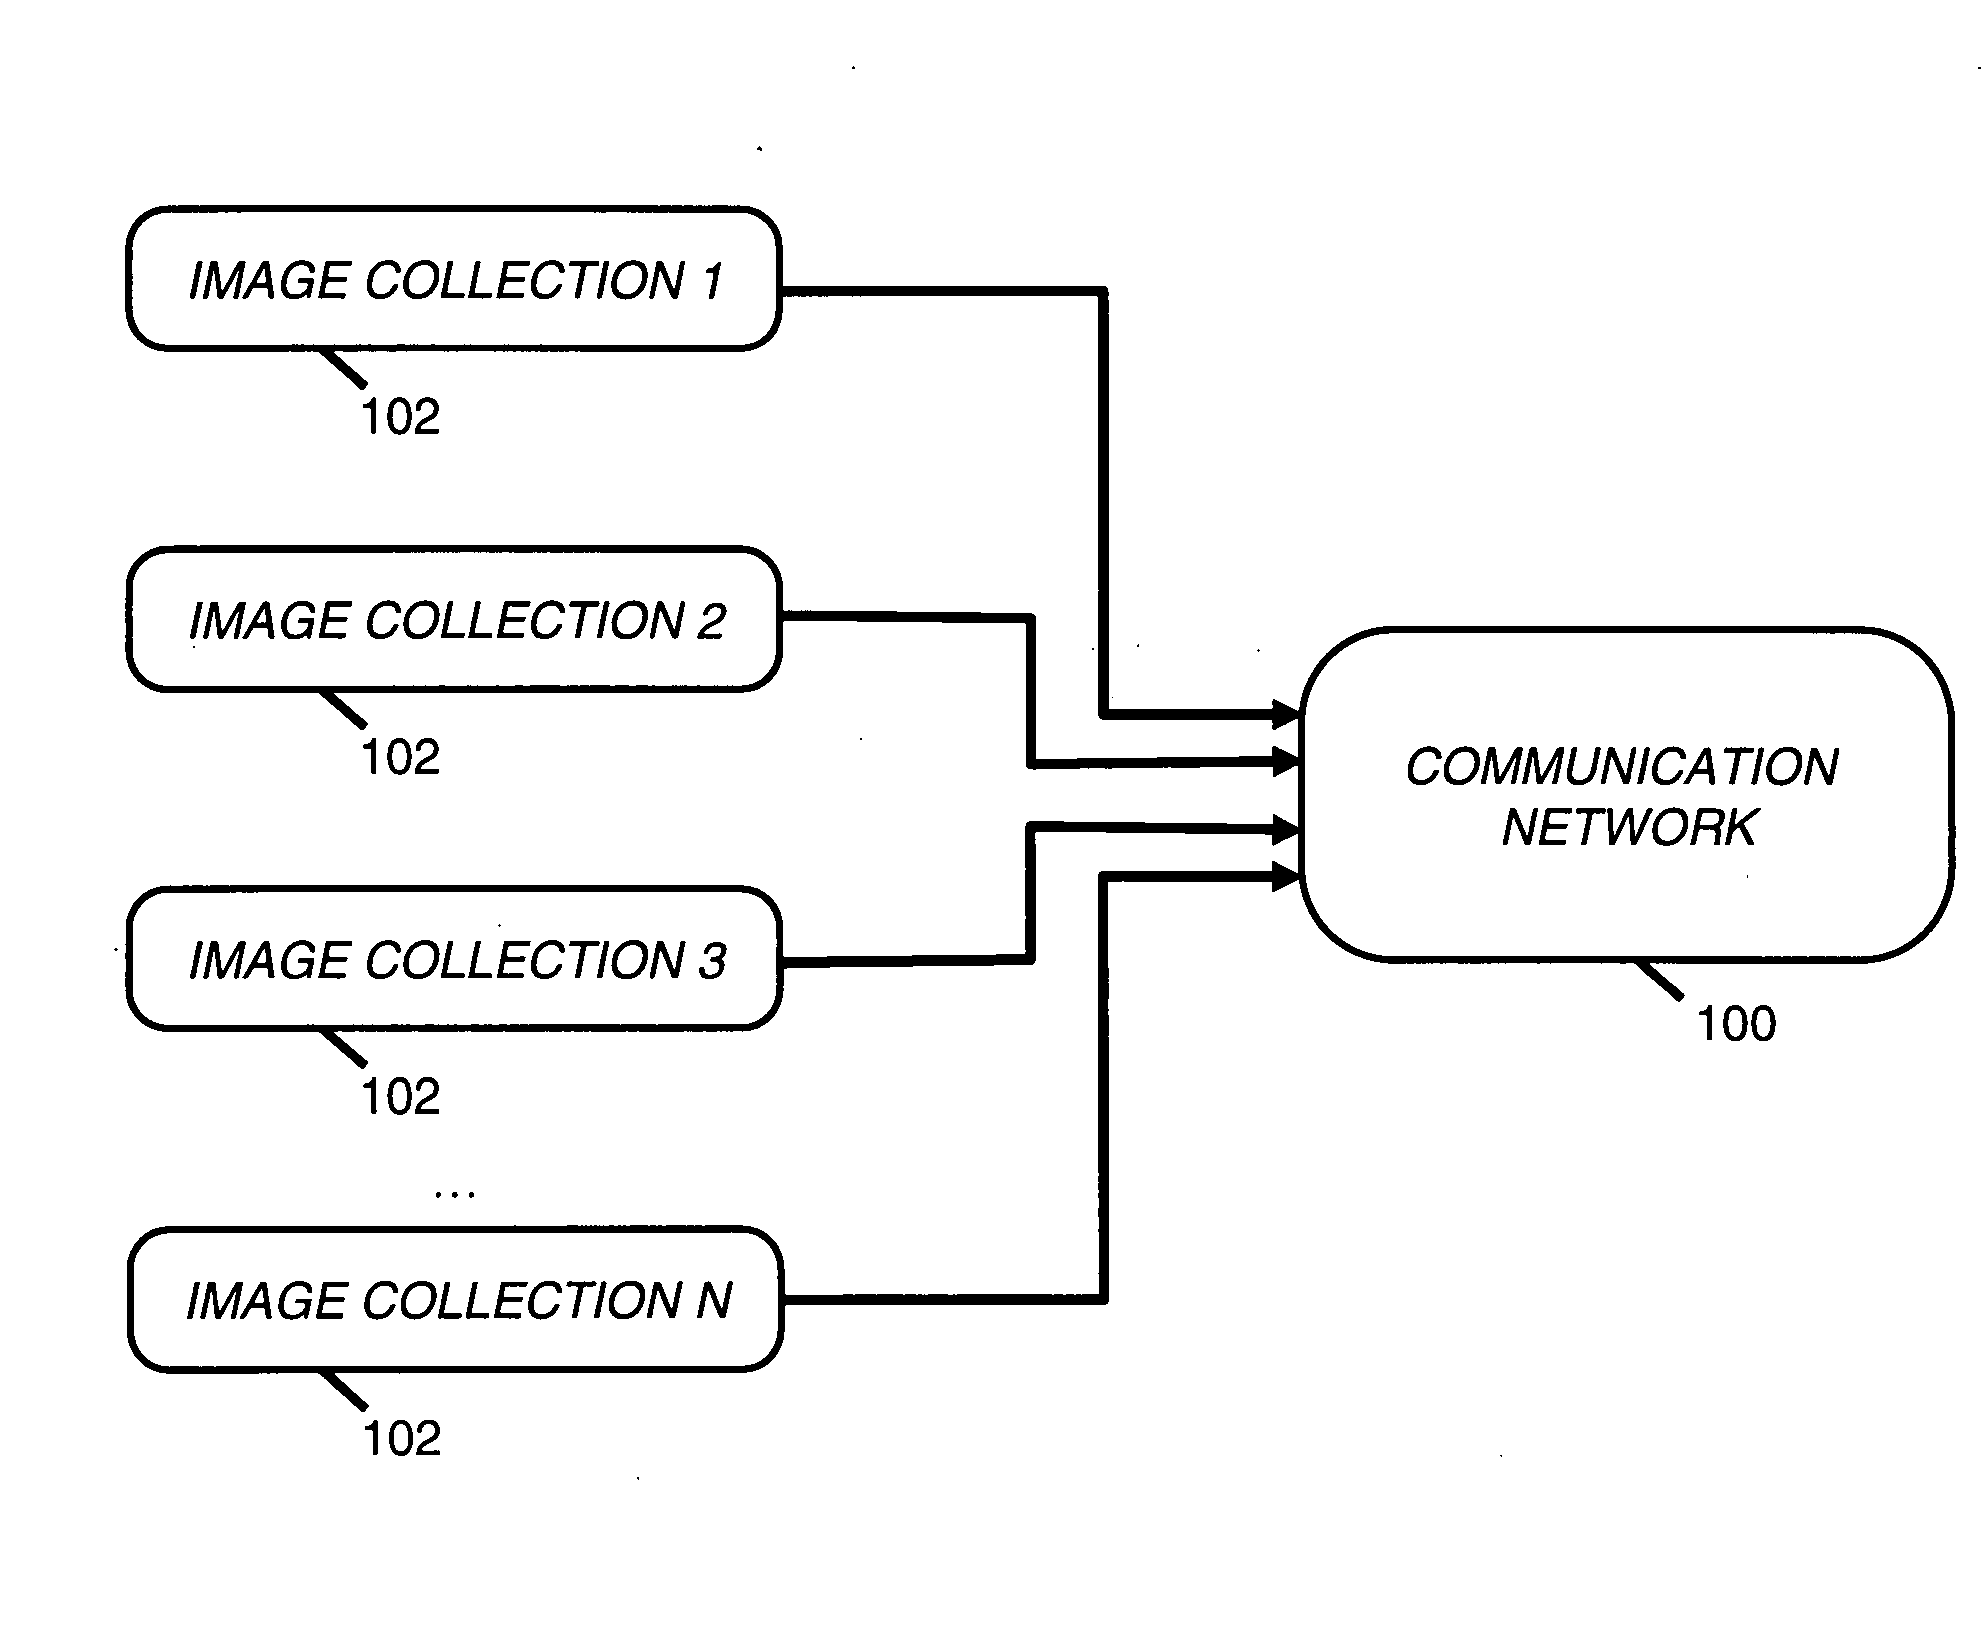 Forming connections between image collections